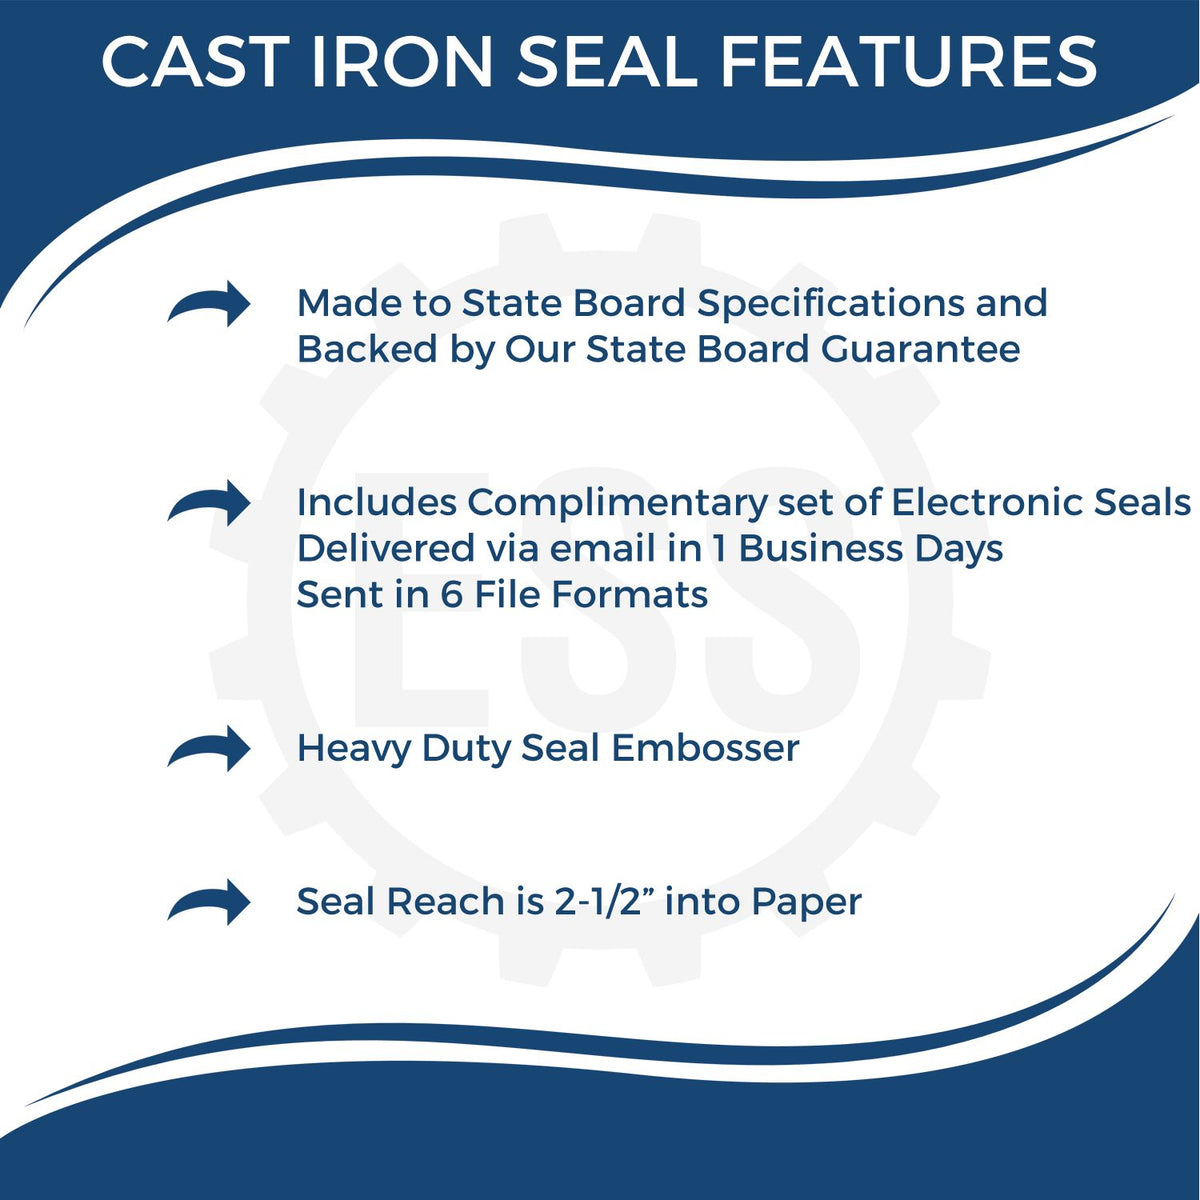 A picture of an infographic highlighting the selling points for the Heavy Duty Cast Iron Rhode Island Architect Embosser